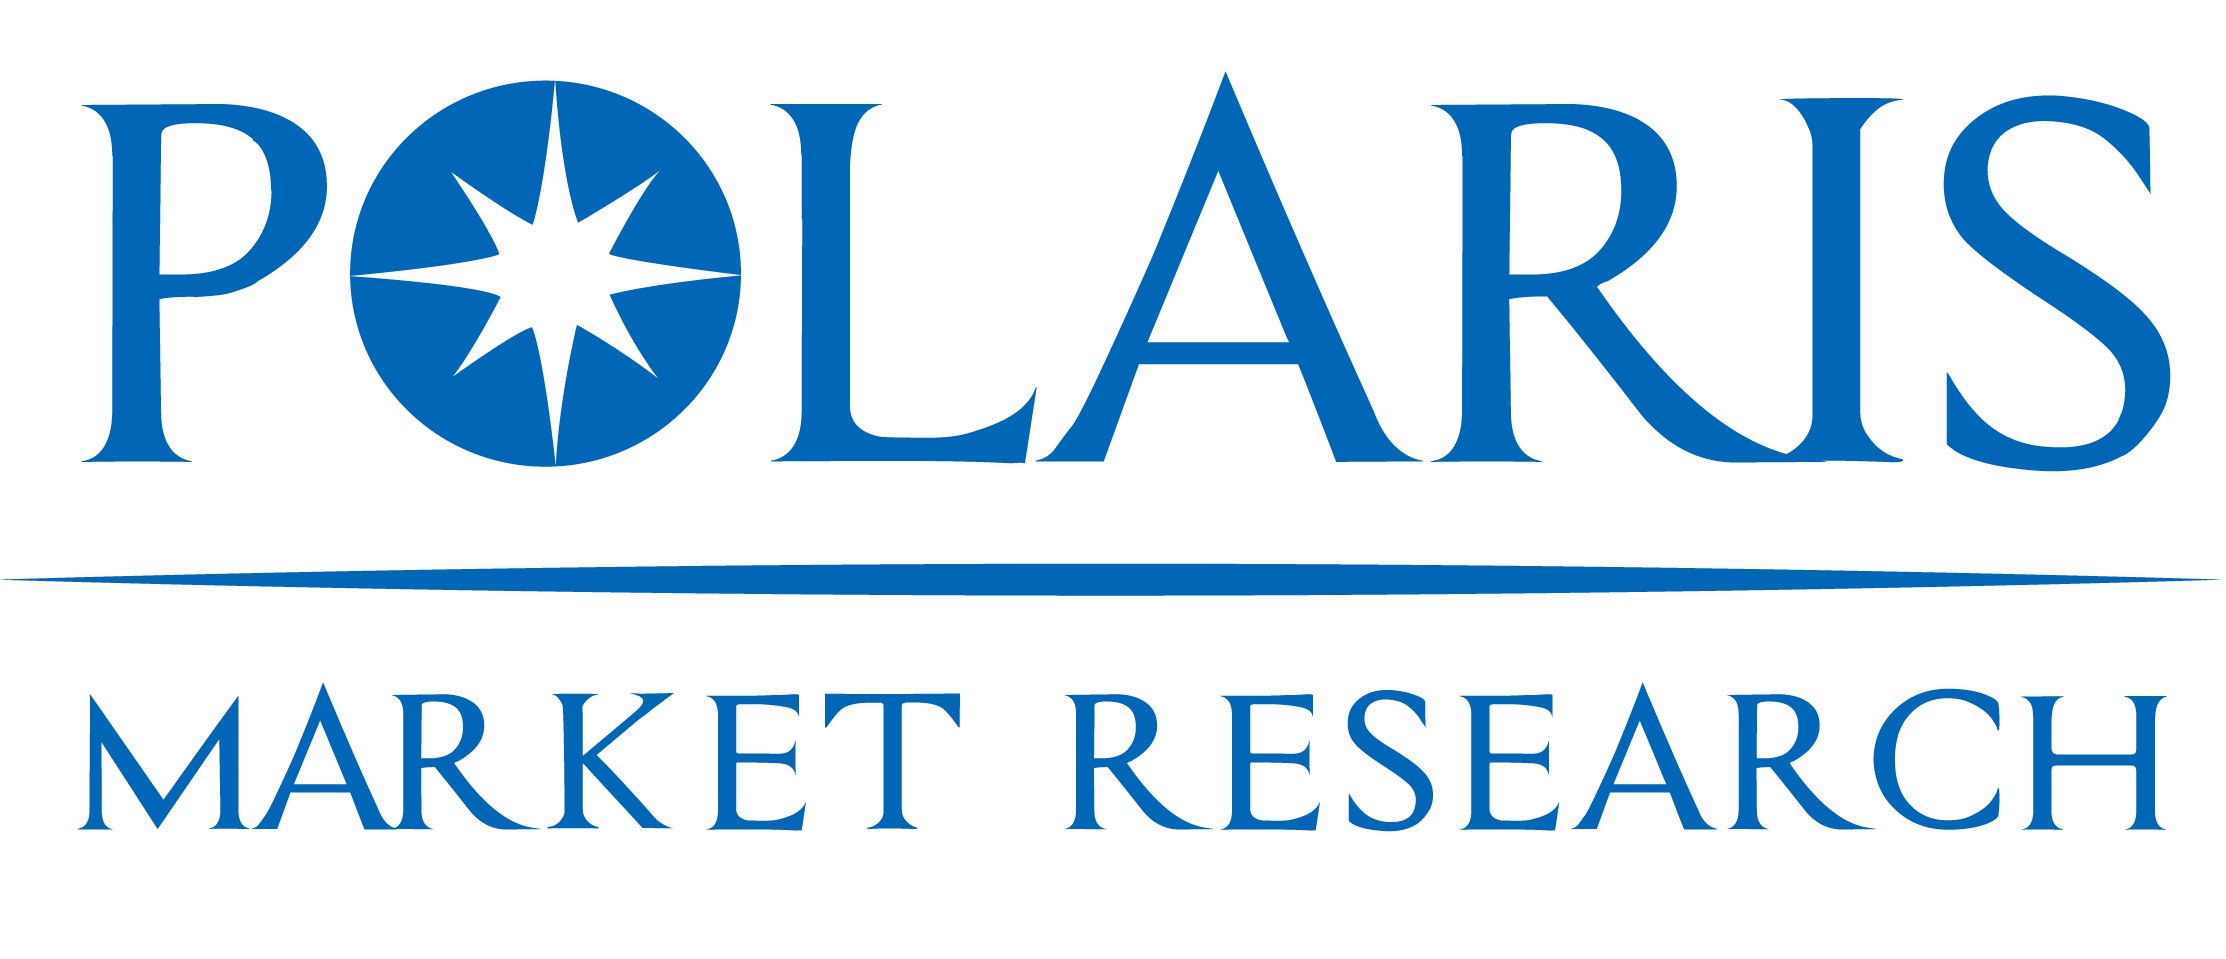 Phytosterols Market Size Worth $1.38 Billion By 2028 | CAGR: 8.4% : Exclusive Study by Polaris Market Research